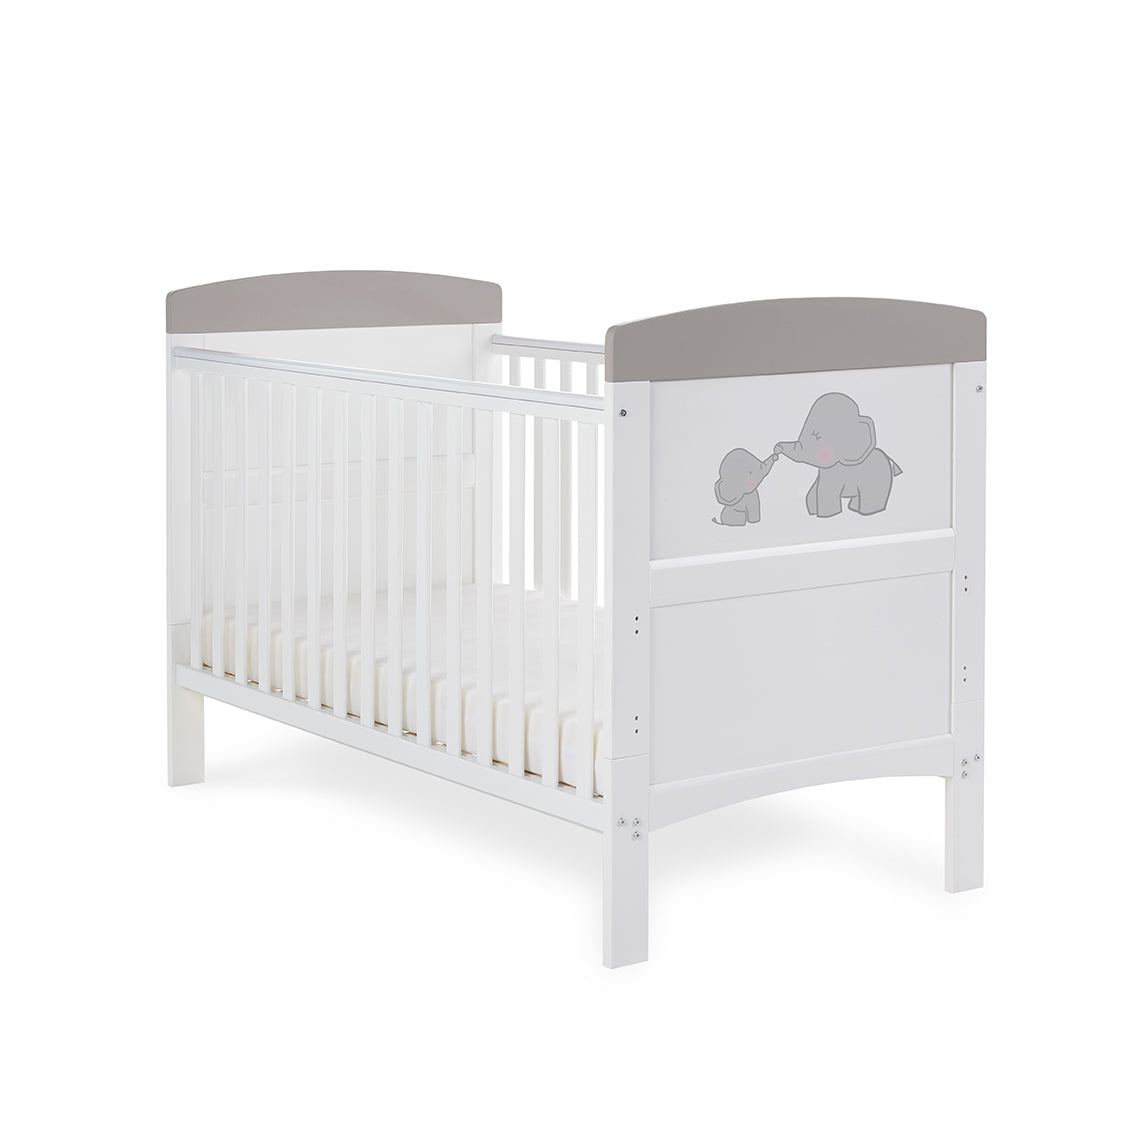 Obaby Grace Inspire Cot Bed – Me & Mini Me Elephants – Grey -  | For Your Little One